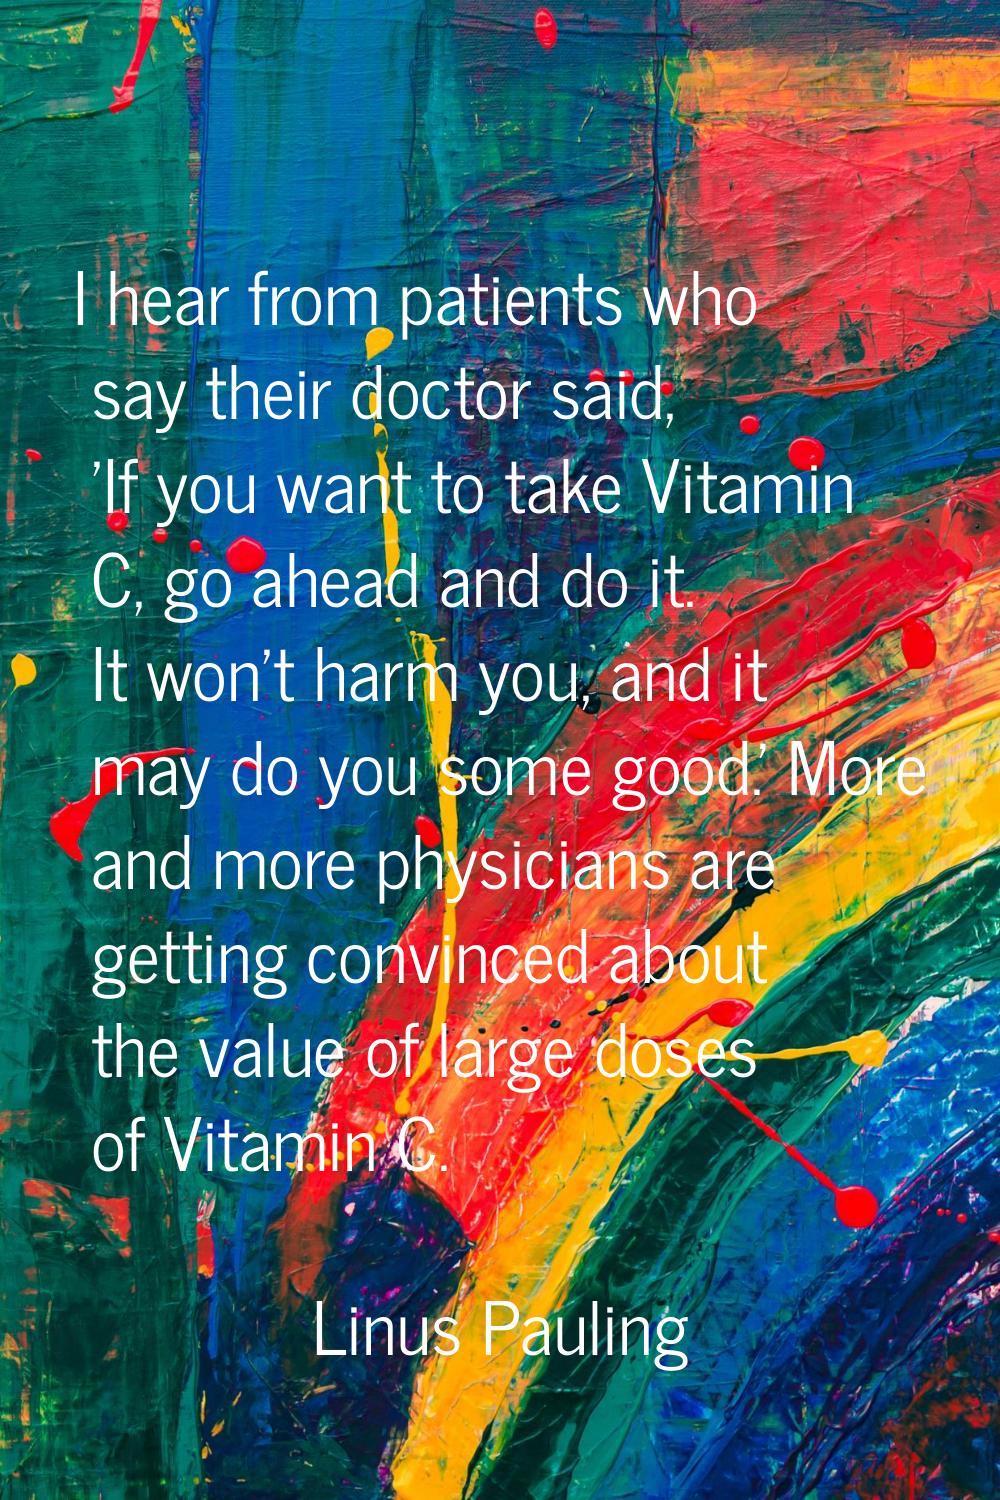 I hear from patients who say their doctor said, 'If you want to take Vitamin C, go ahead and do it.